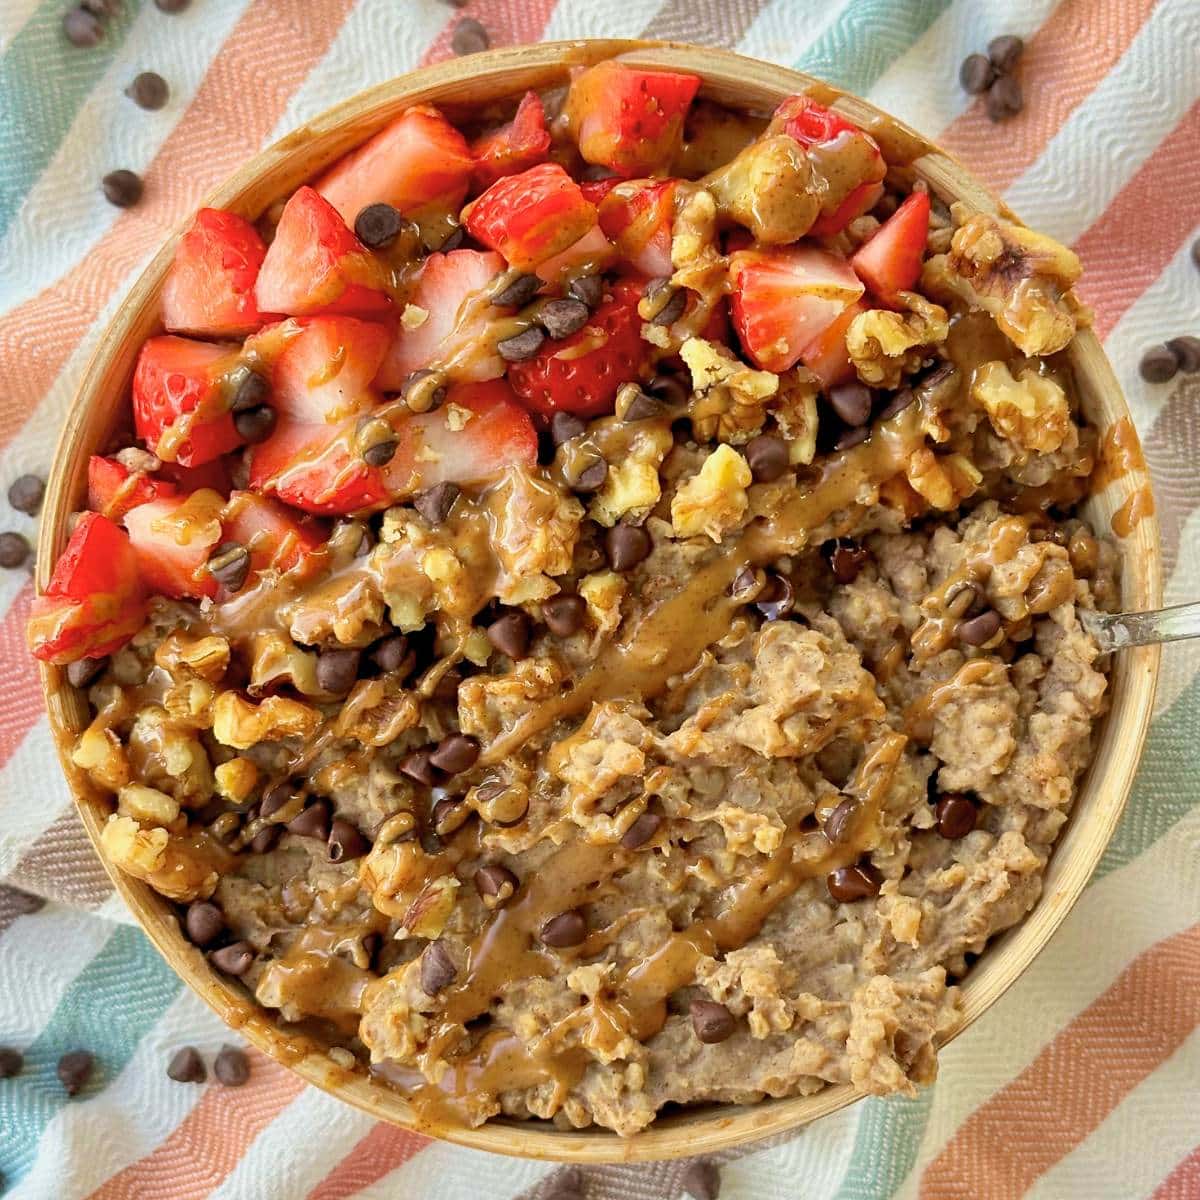 Protein steel cut oats in a bowl, topped with chopped strawberries, walnuts, chocolate chips, and almond butter.